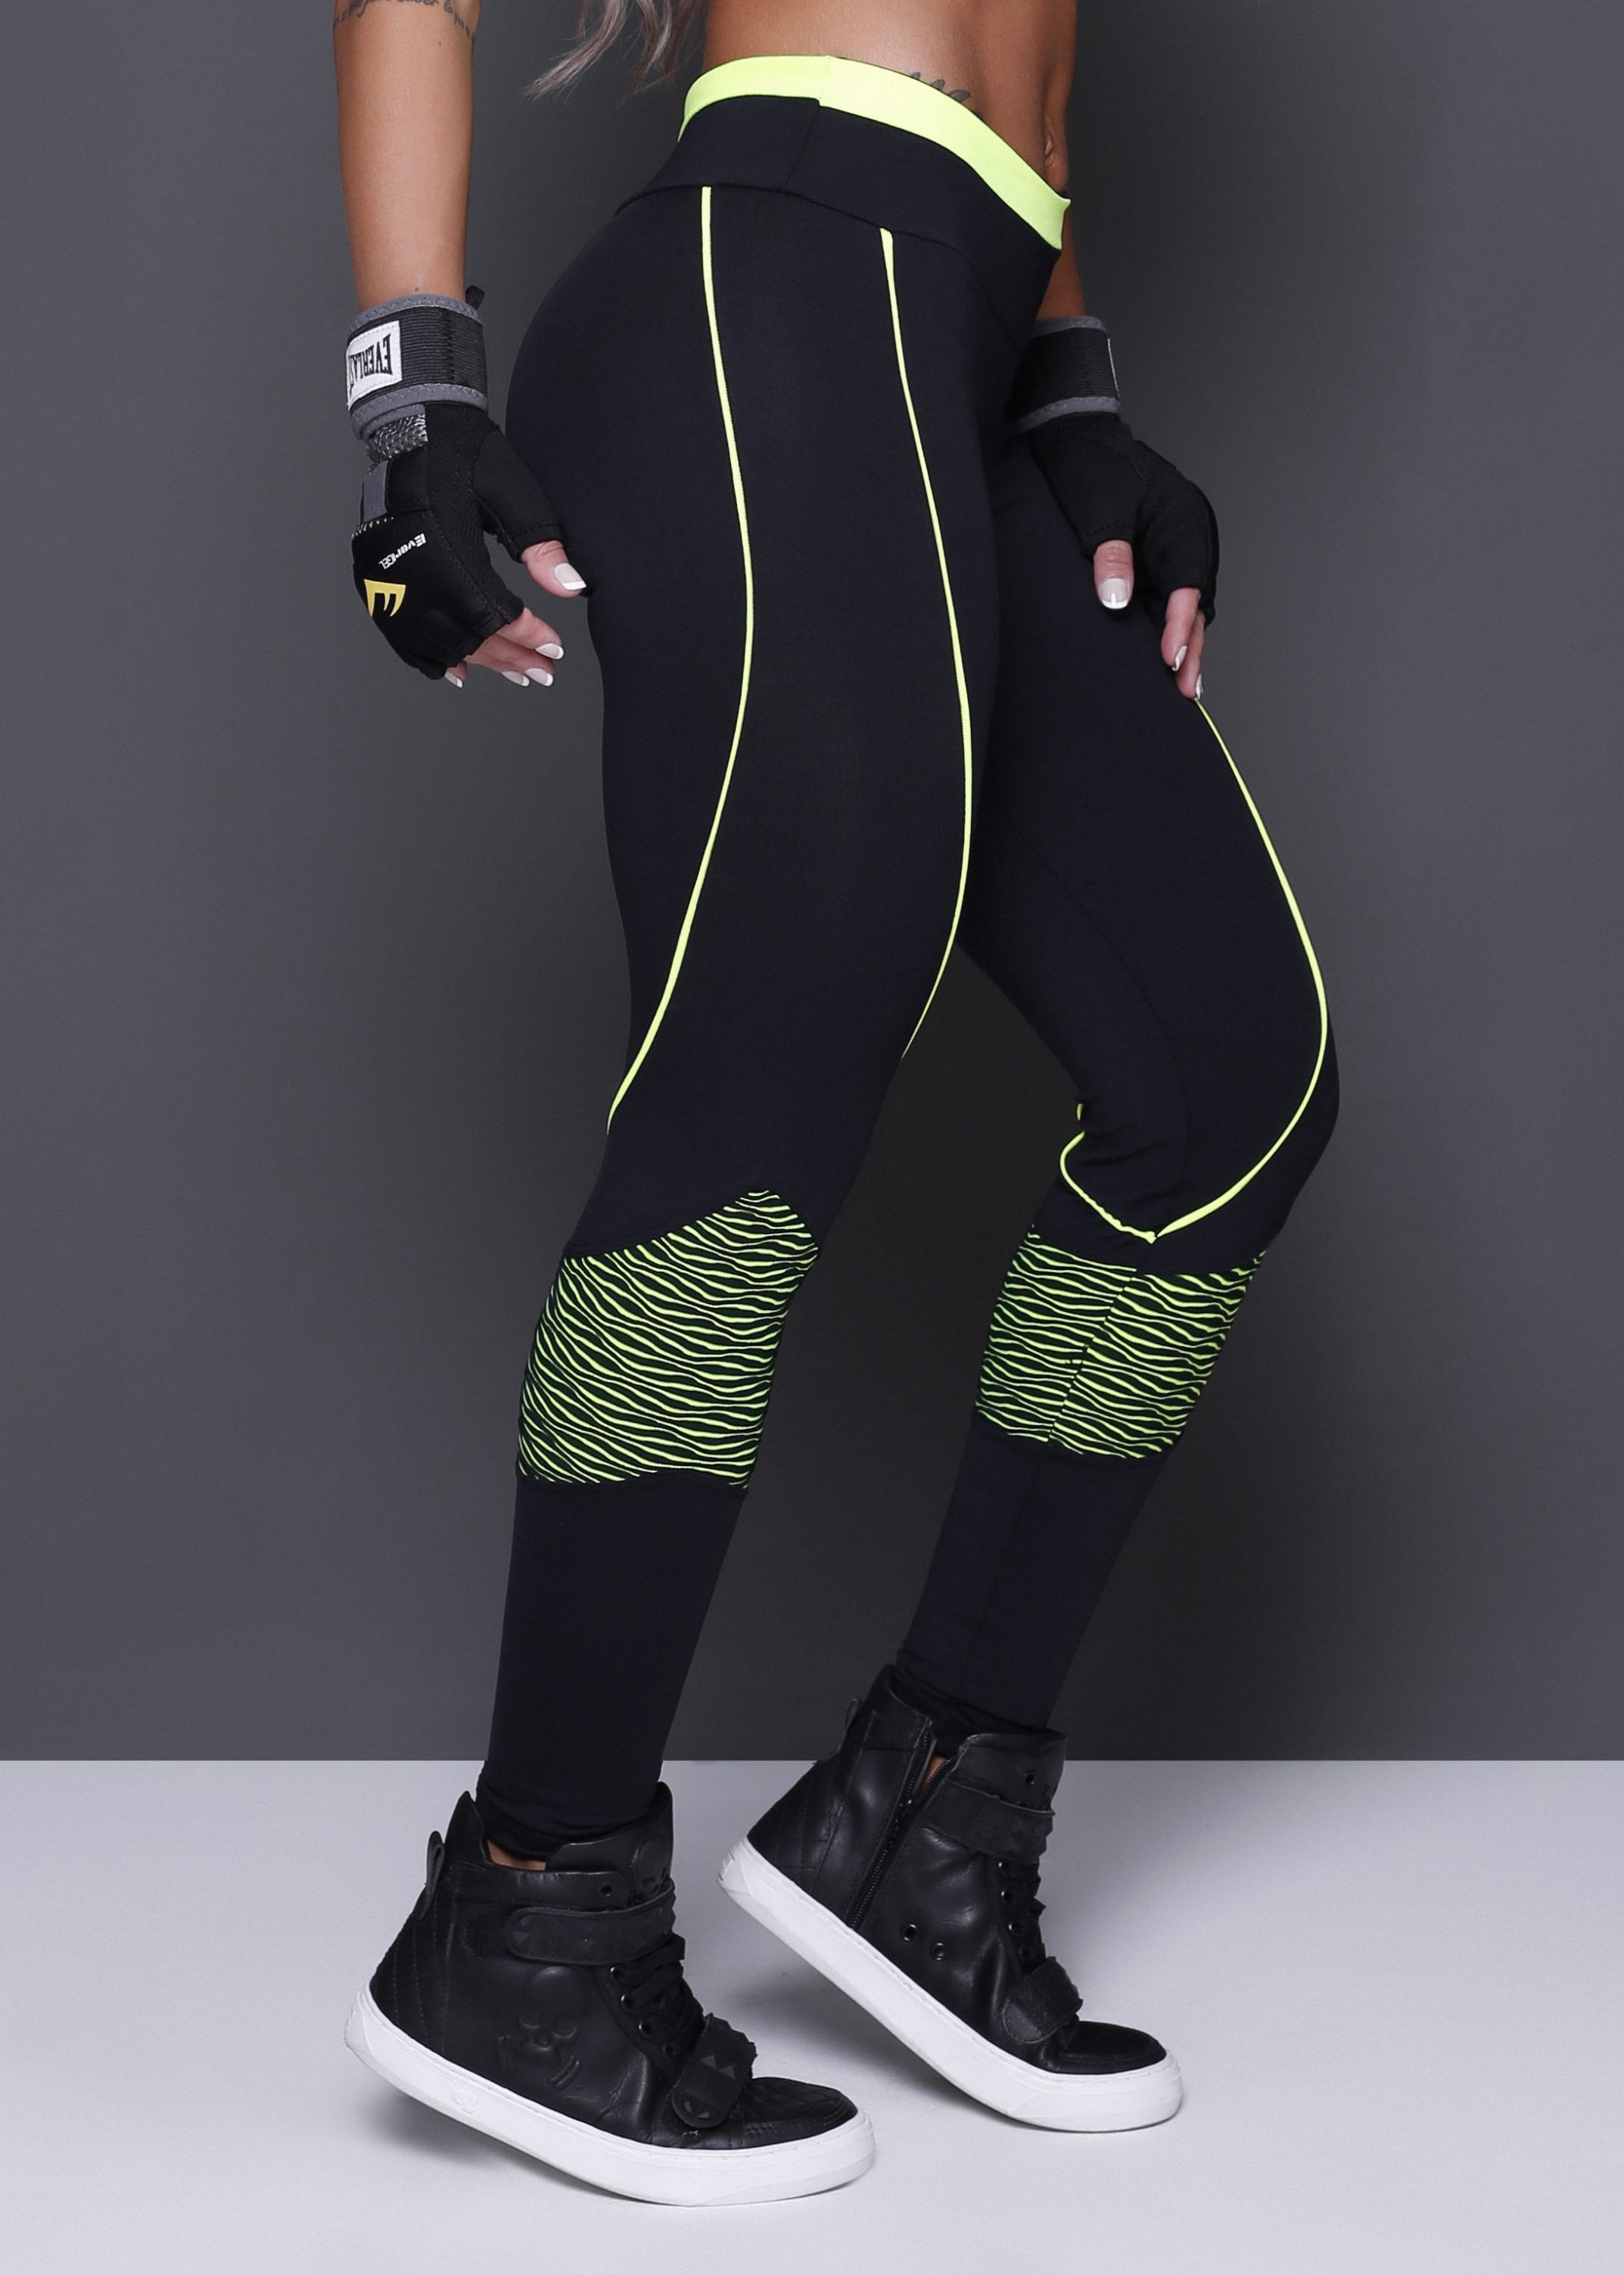 Short Body Shapes Leggings For Women Over 60  International Society of  Precision Agriculture